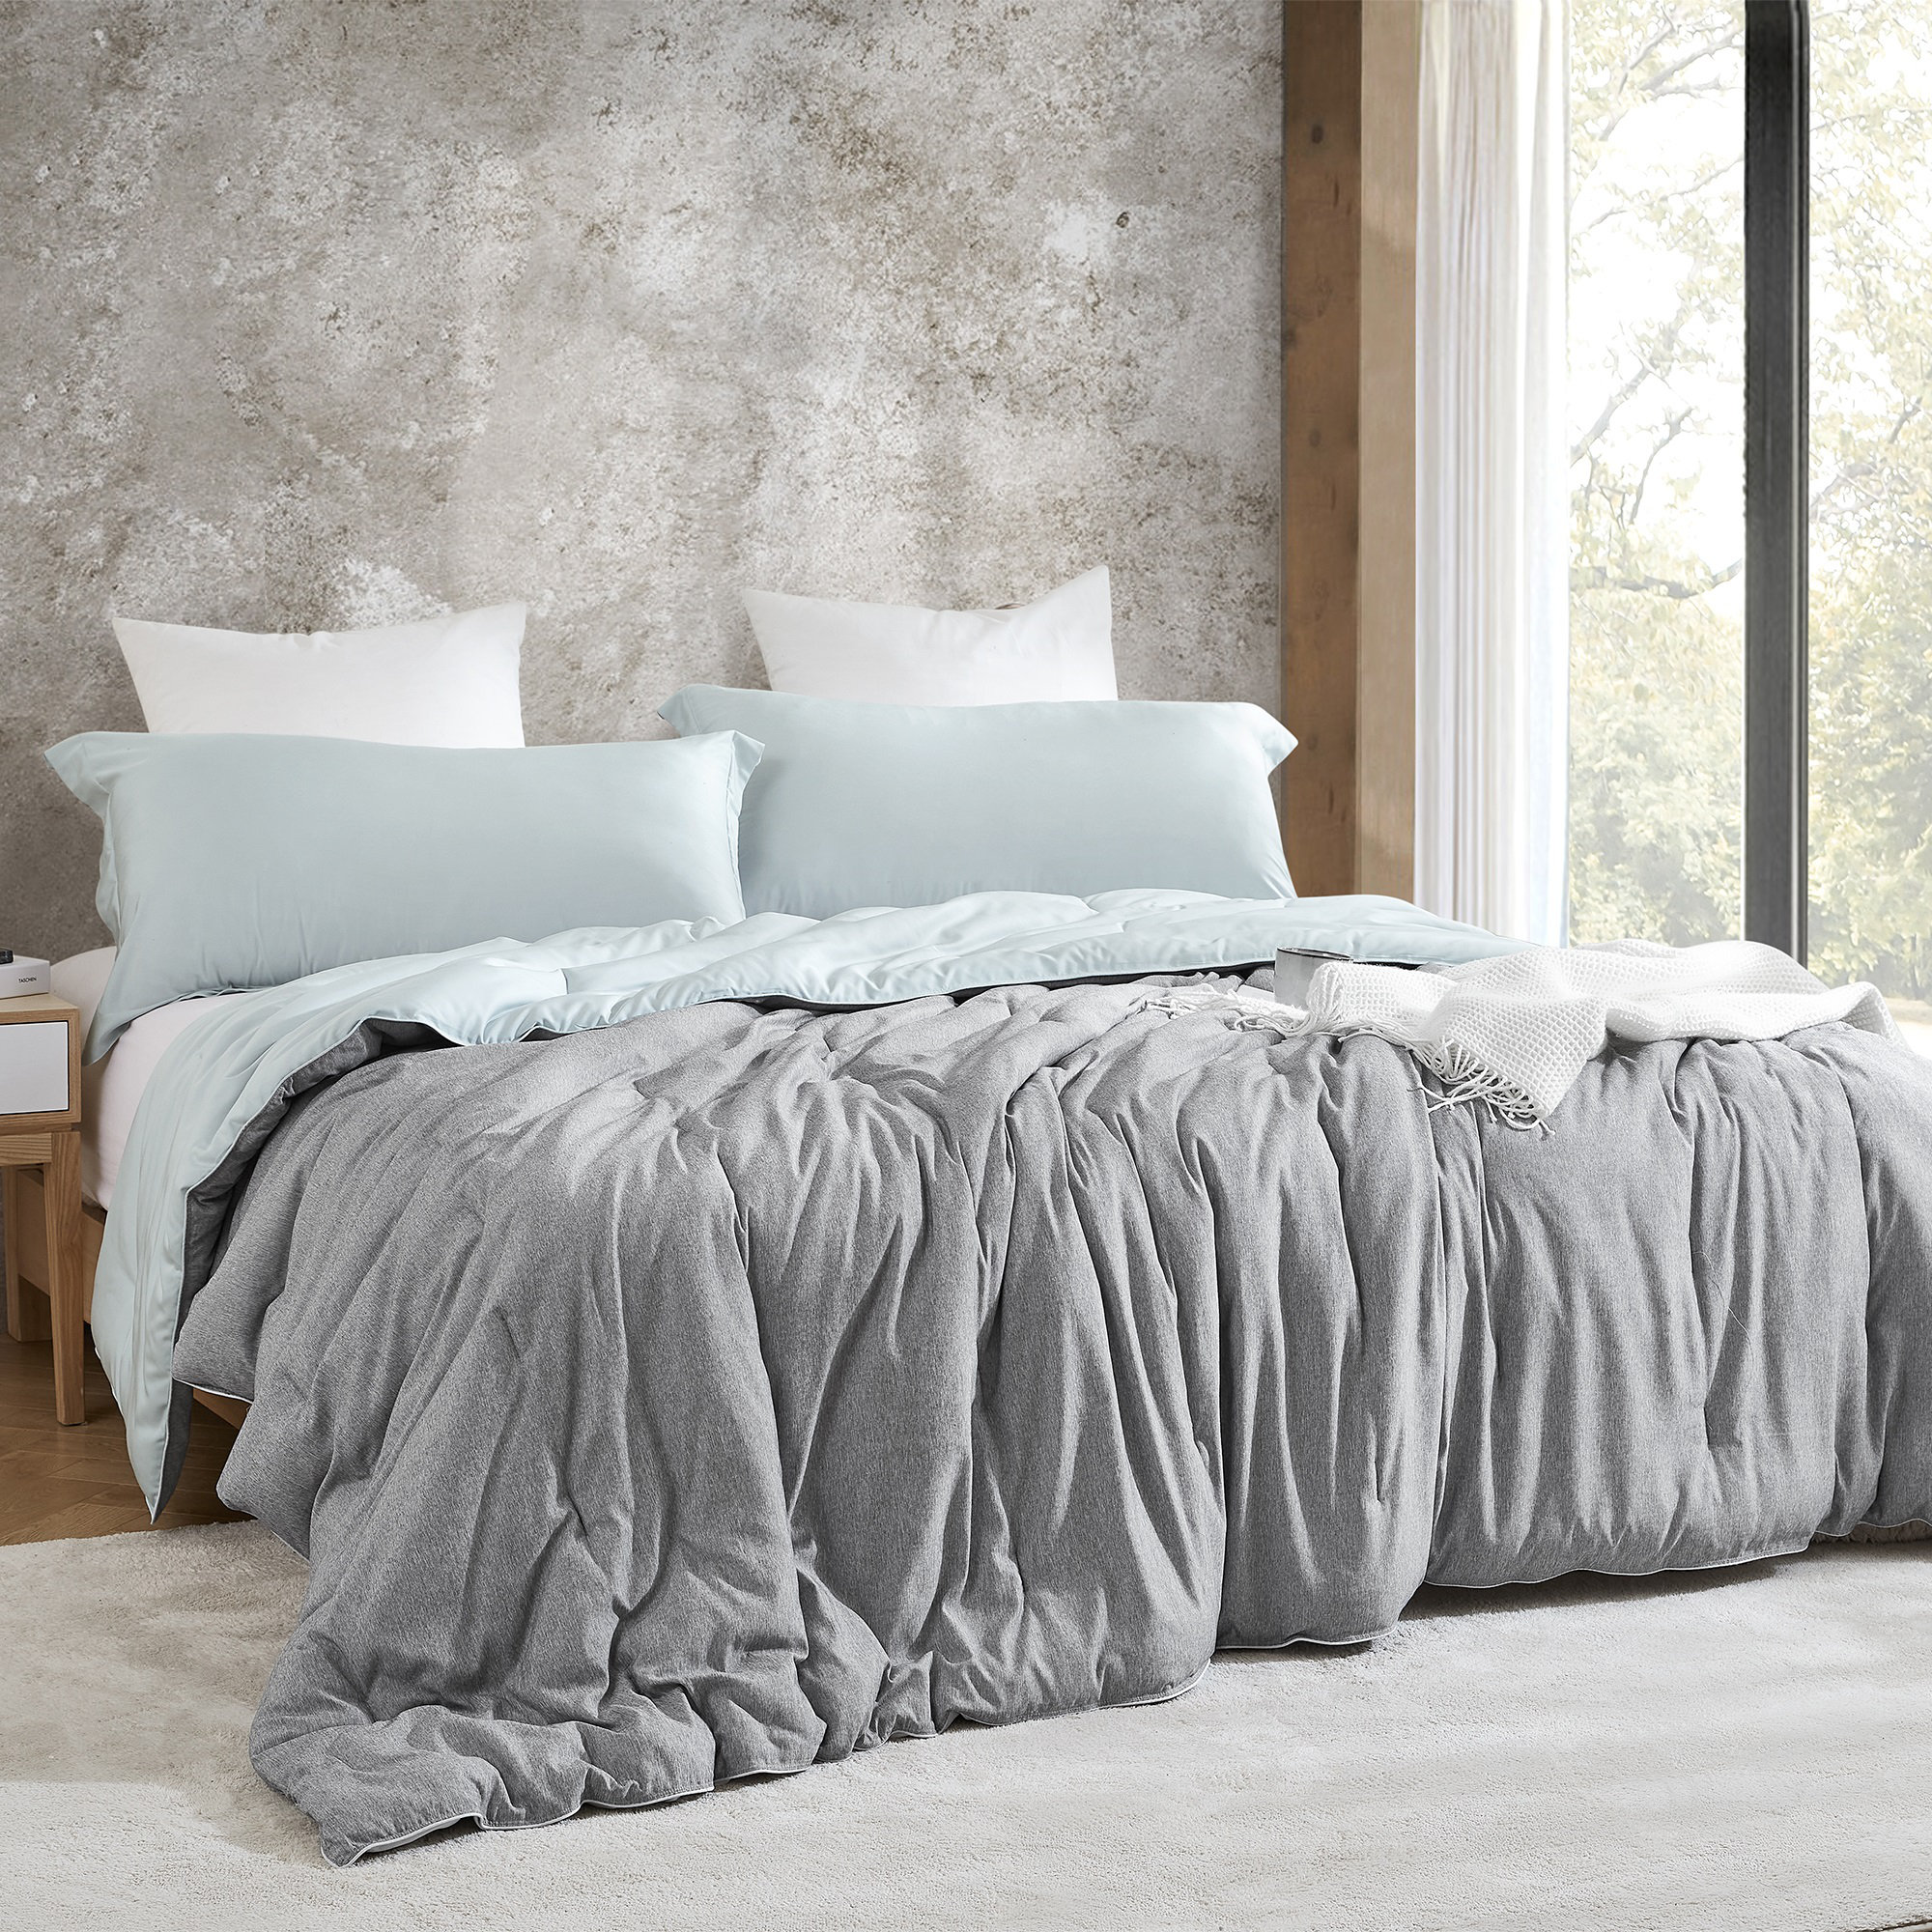 Snorze Cloud Comforter - Coma Inducer Ultra Cozy Bamboo - Oversized Queen  in White